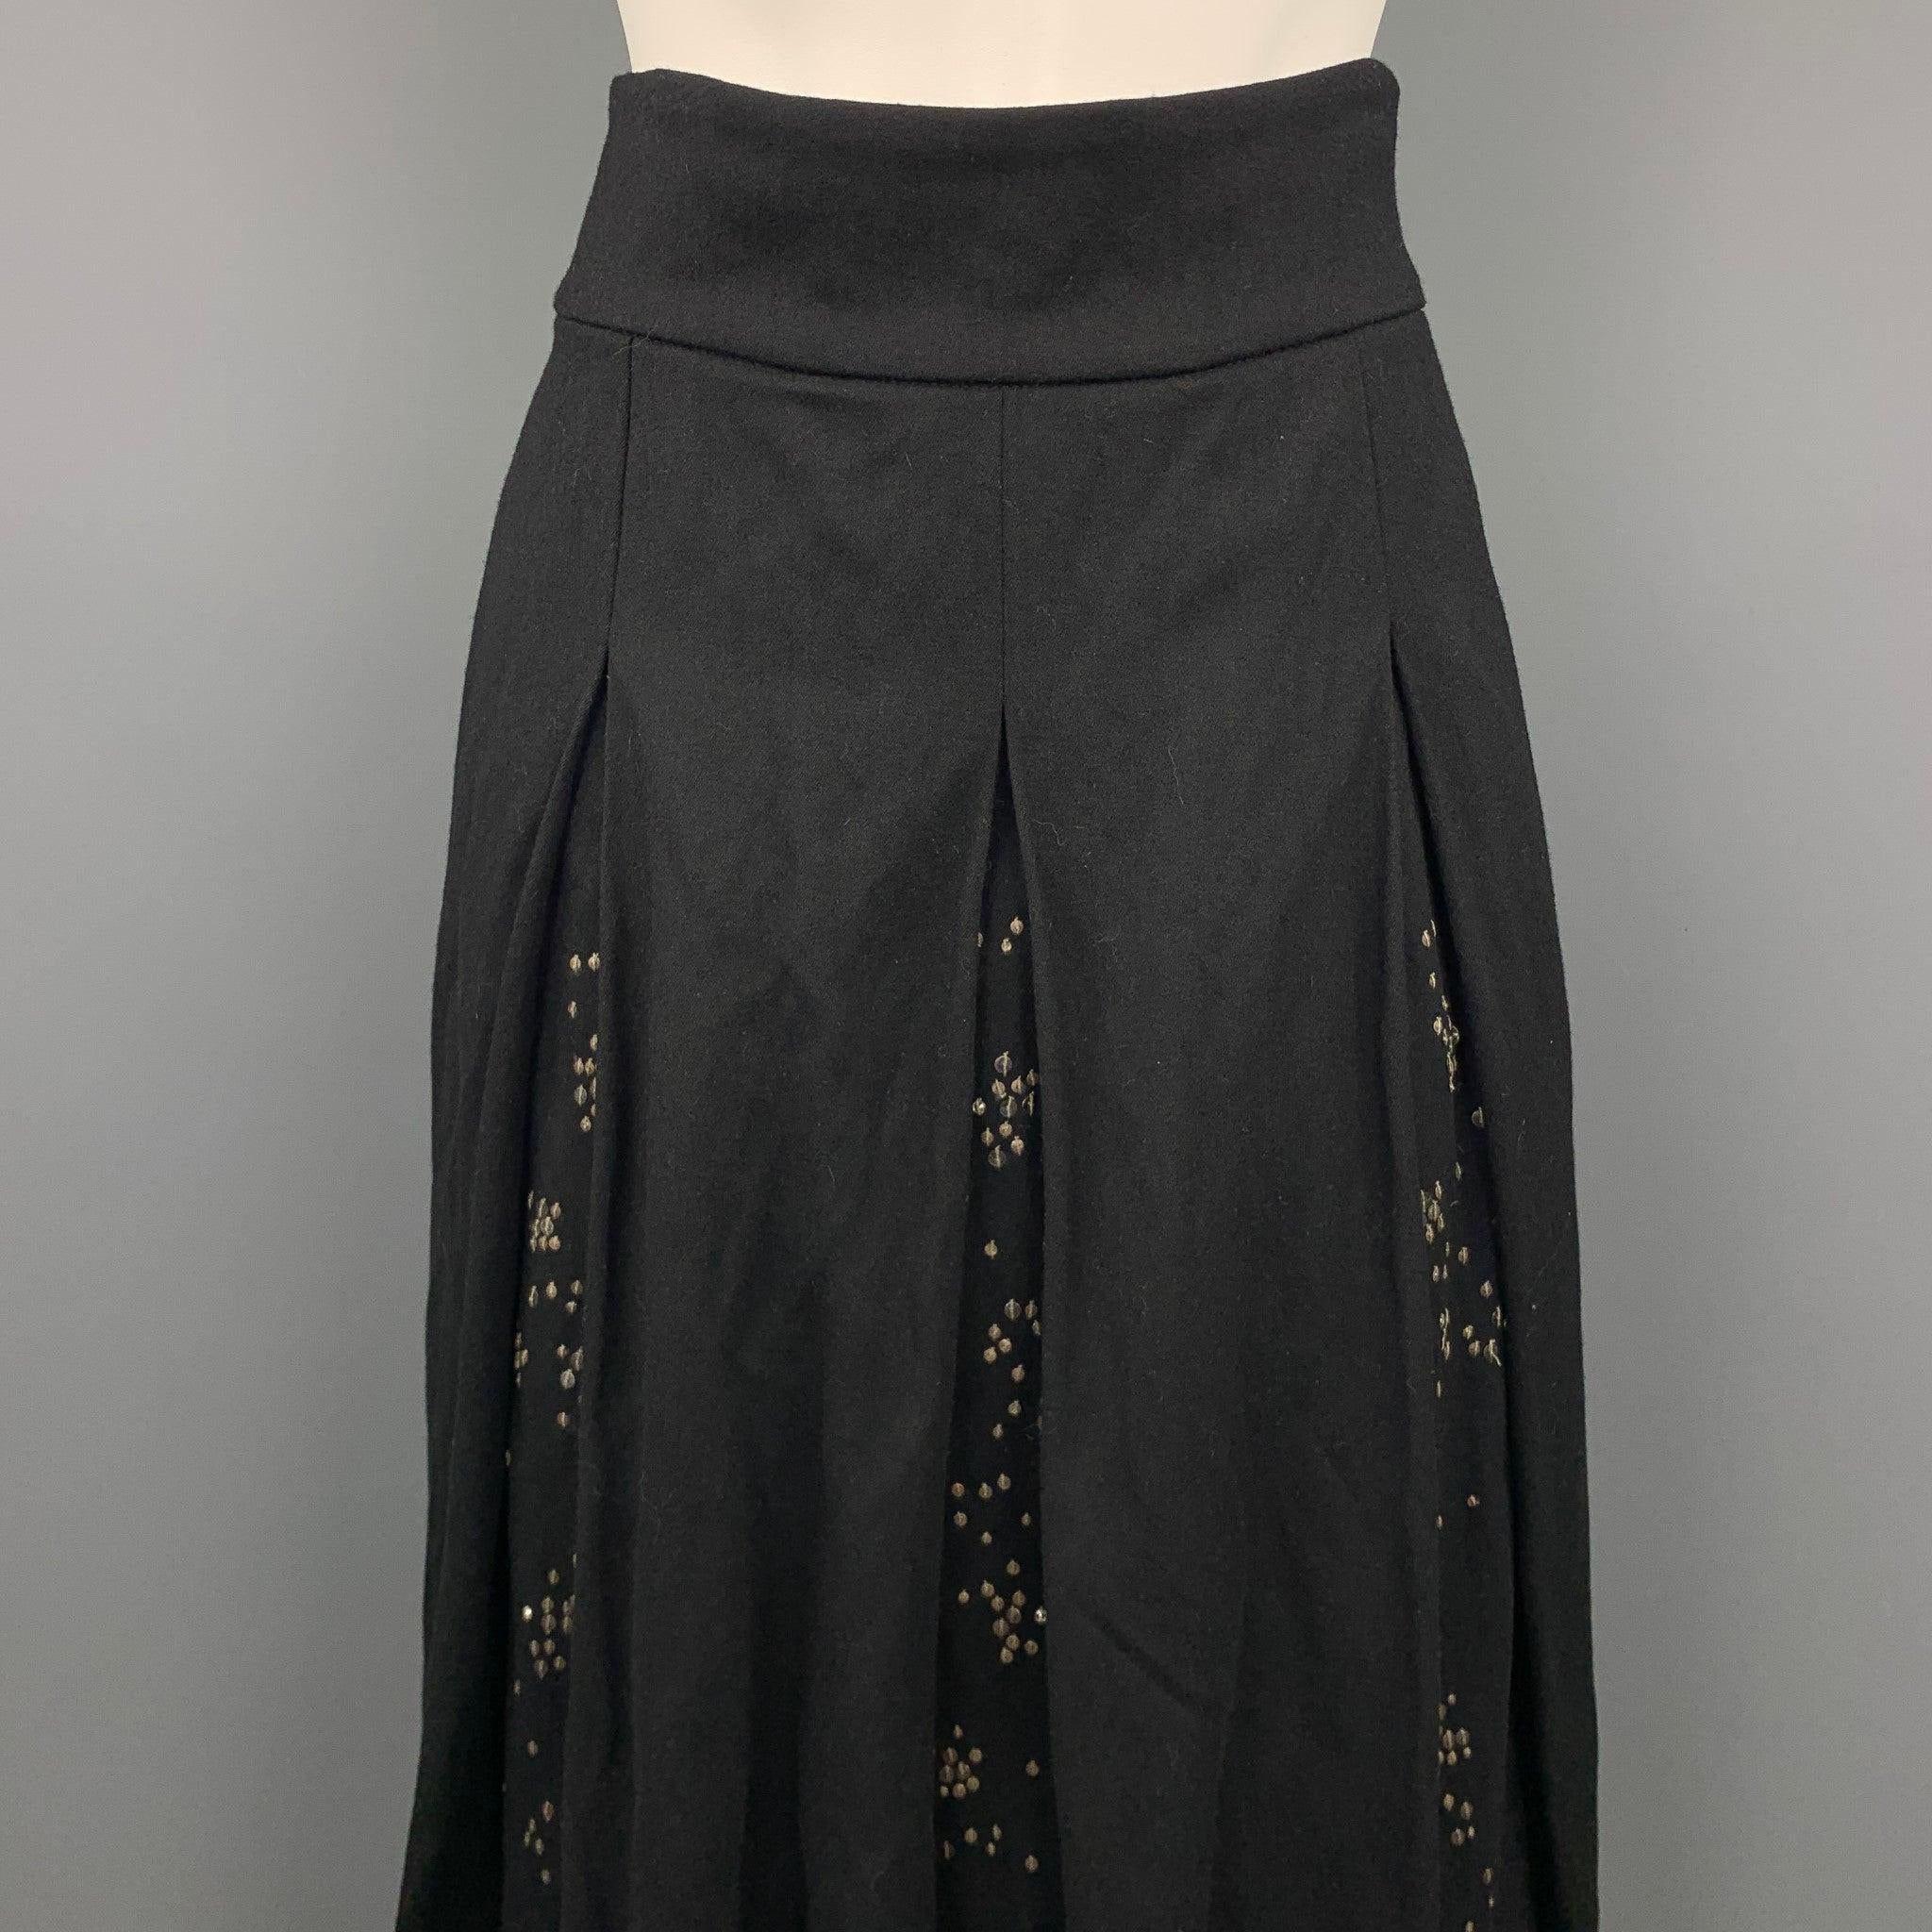 DRIES VAN NOTEN skirt comes in a black wool with sequined details featuring a pleated style, rhinestones, and a side zip up closure. Made in Belgium.Good
Pre-Owned Condition. 

Marked:   36 

Measurements: 
  Waist: 26 inches 
Hip: 38 inches